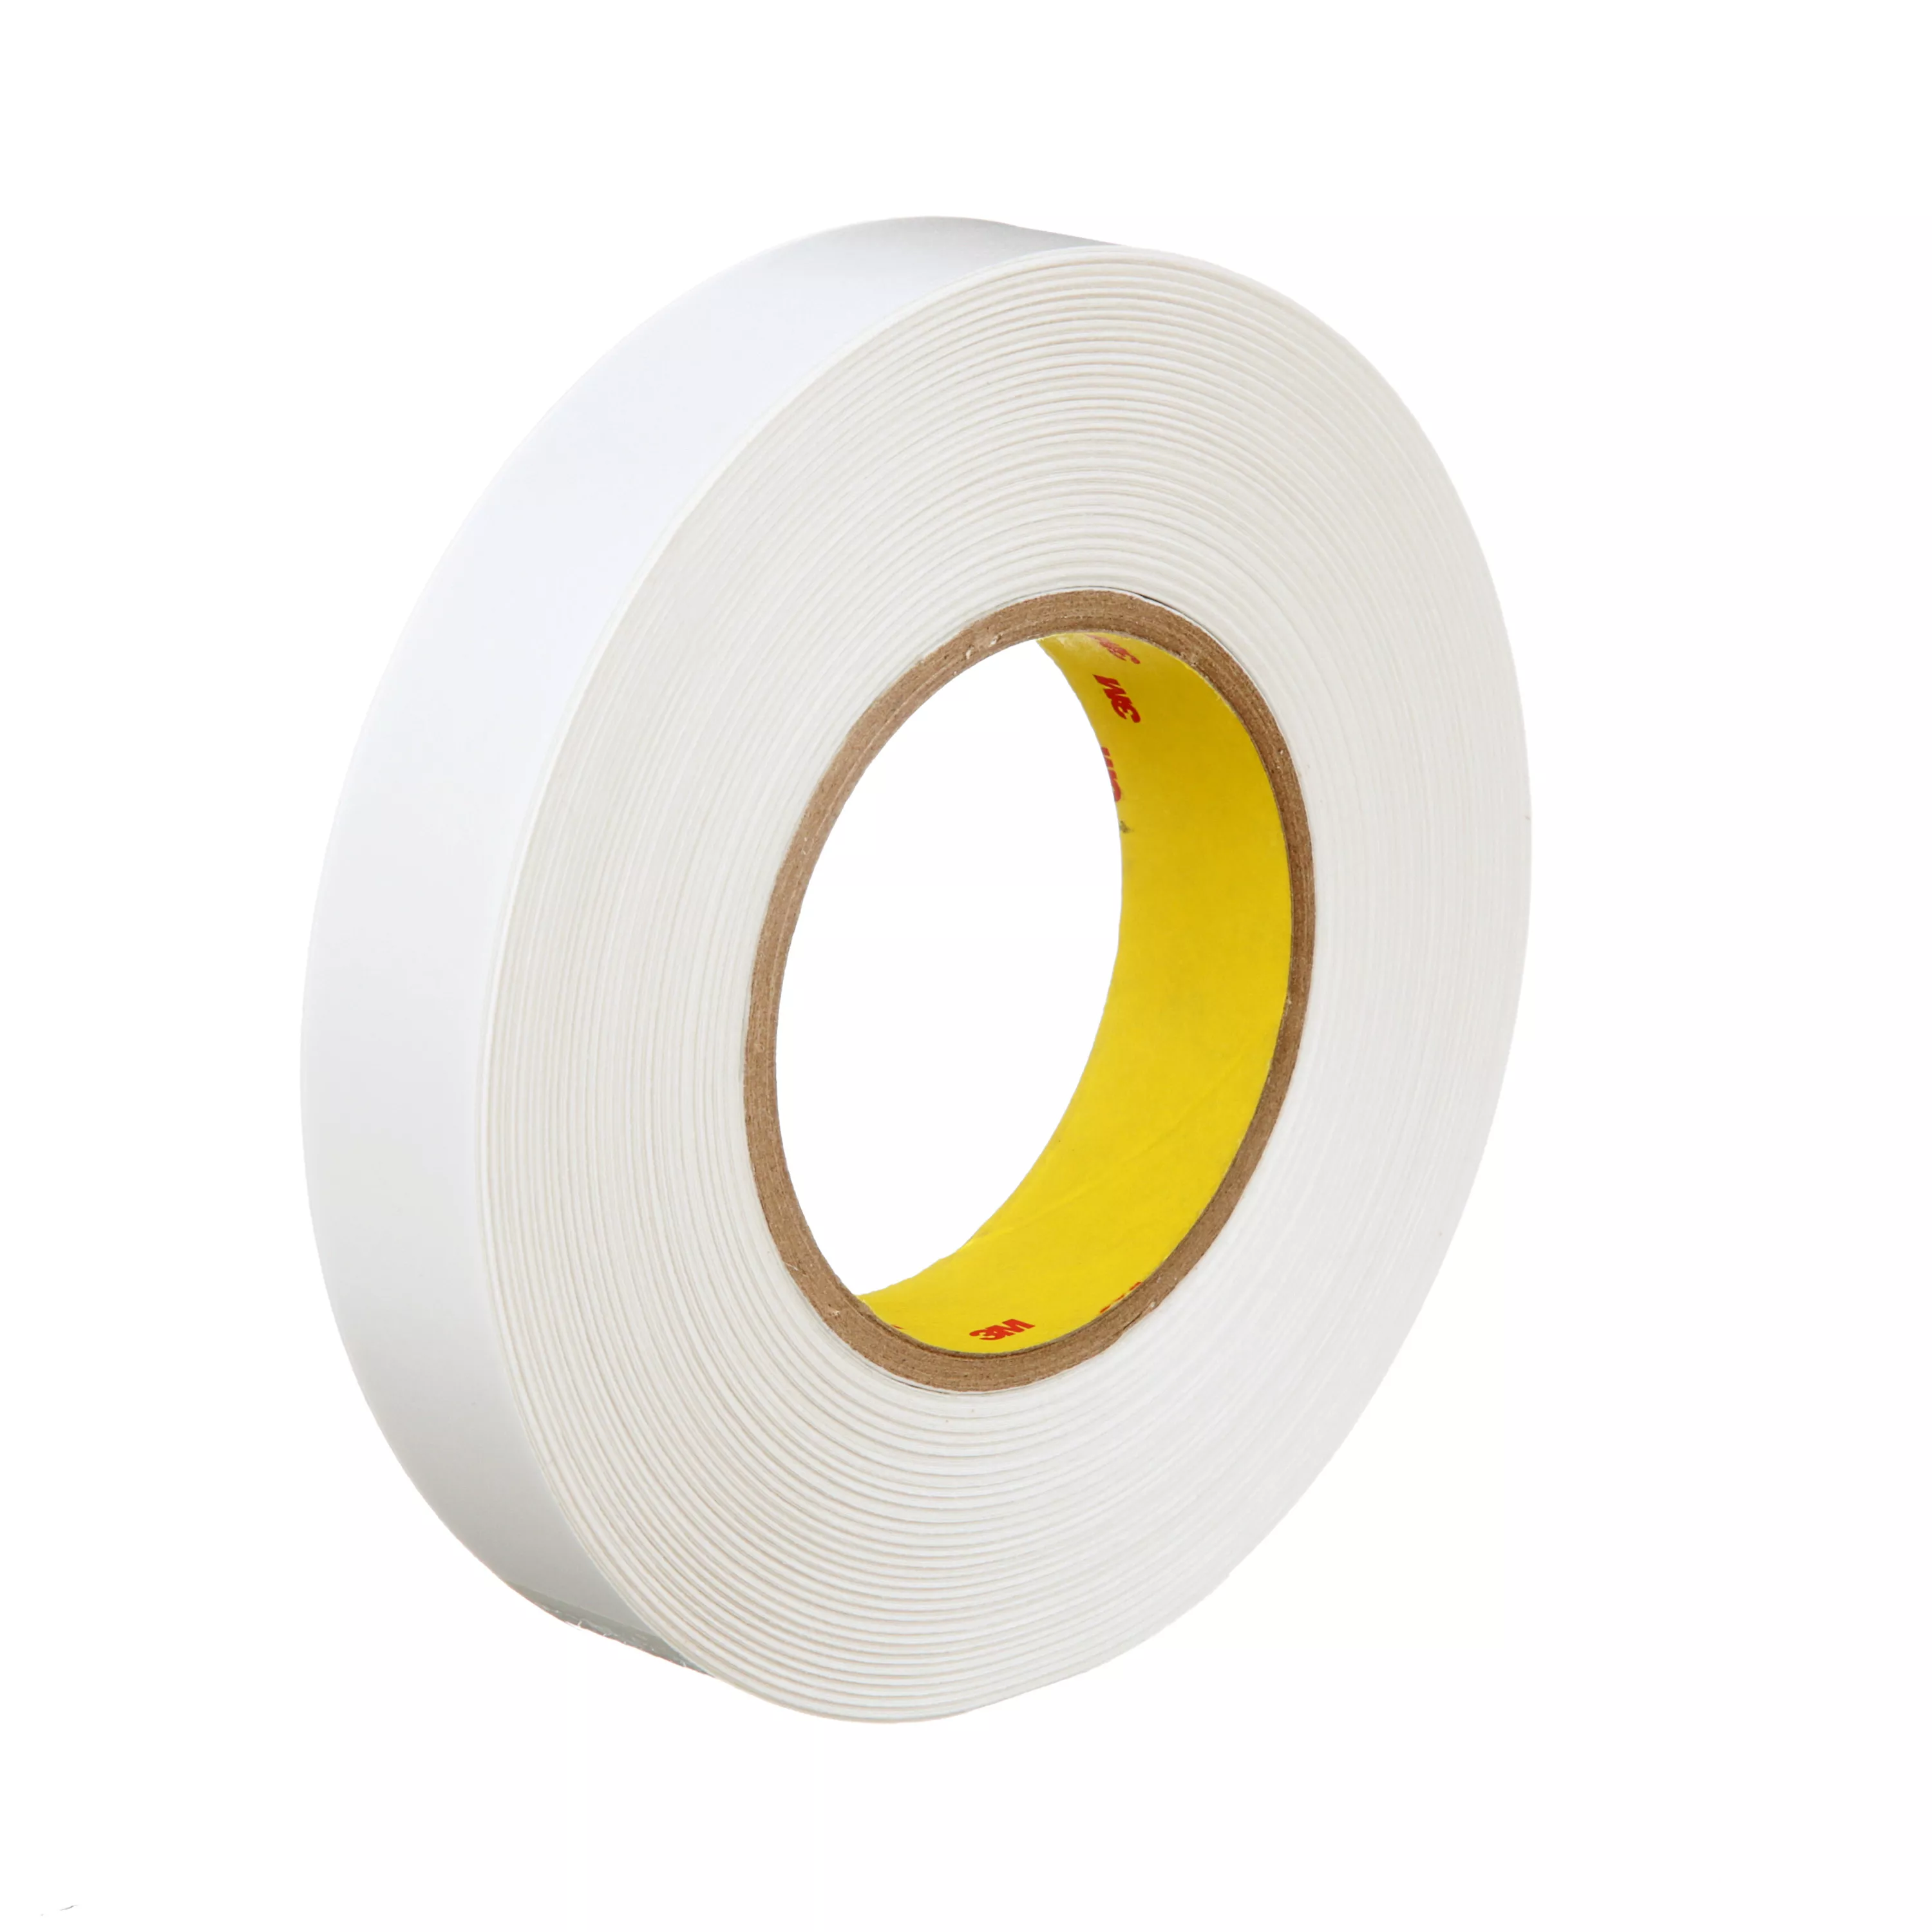 3M™ Removable Repositionable Tape 9415PC, Clear, 1 in x 72 yd, 2 mil, 36
Rolls/Case